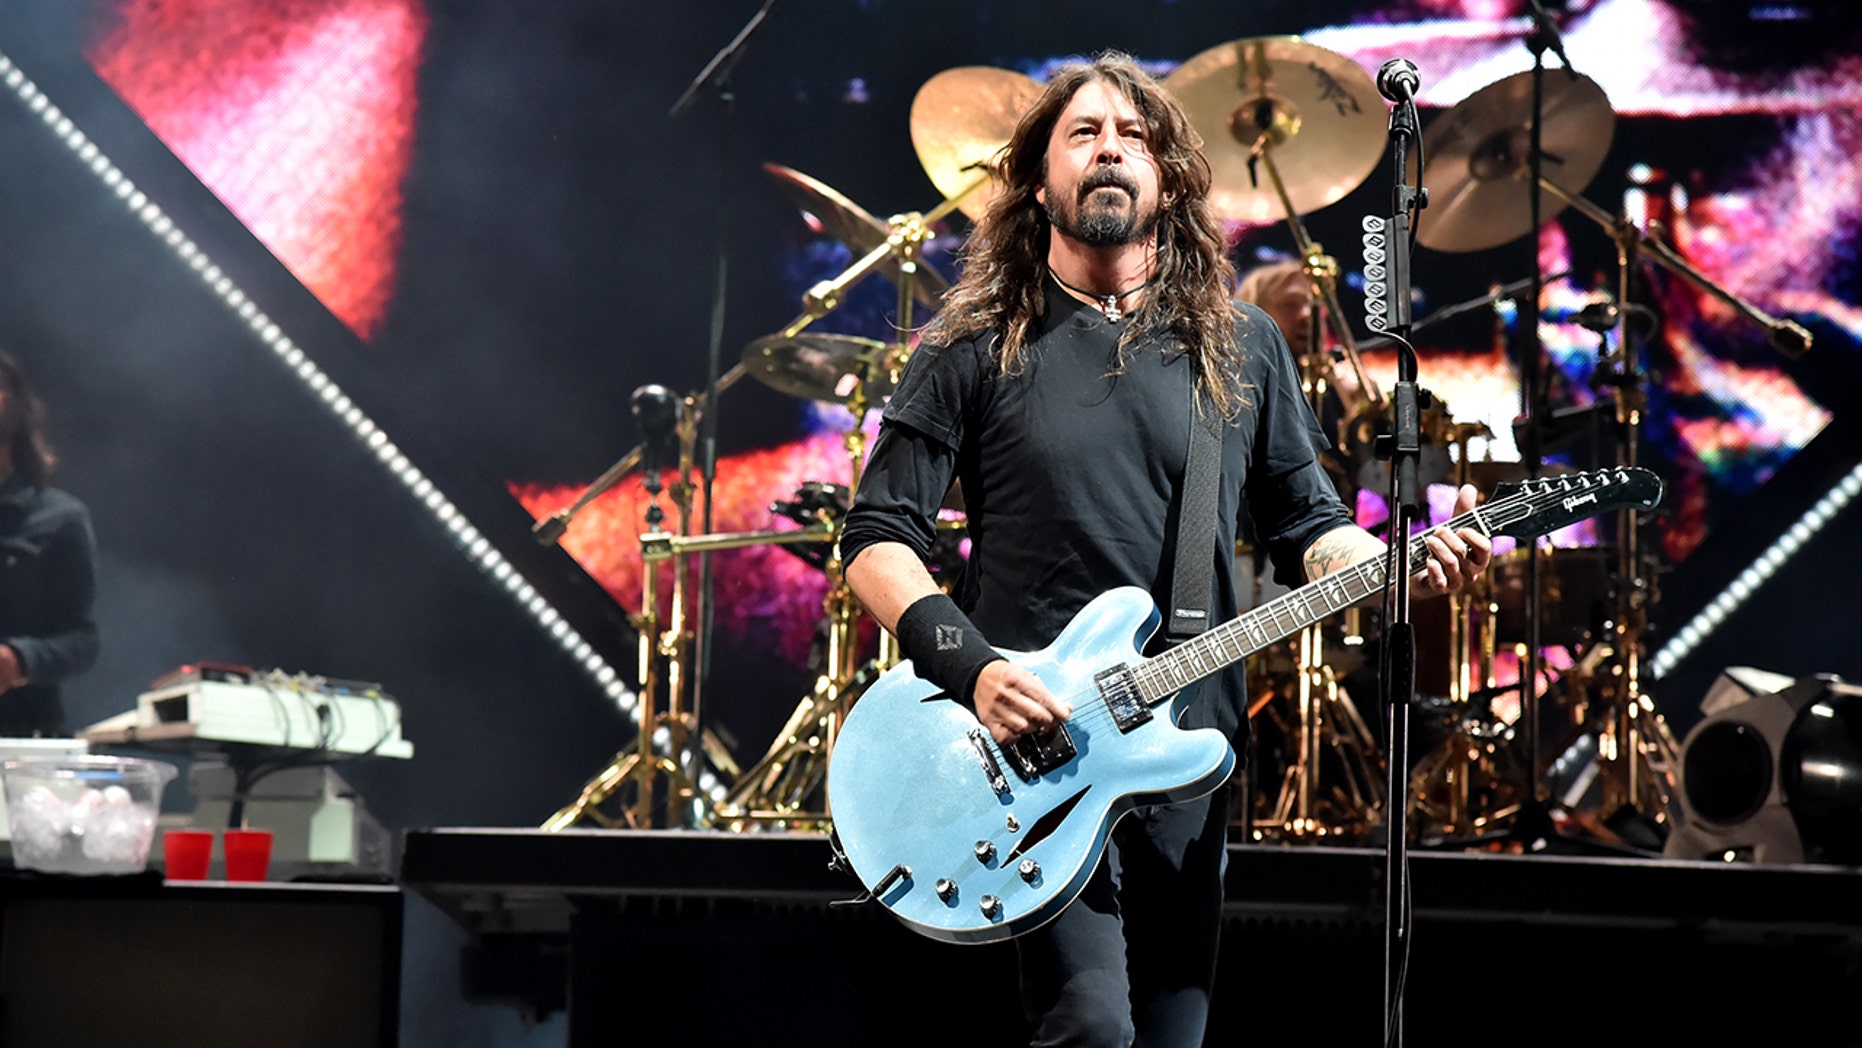 The leader of the Foo Fighters, Dave Grohl, played 